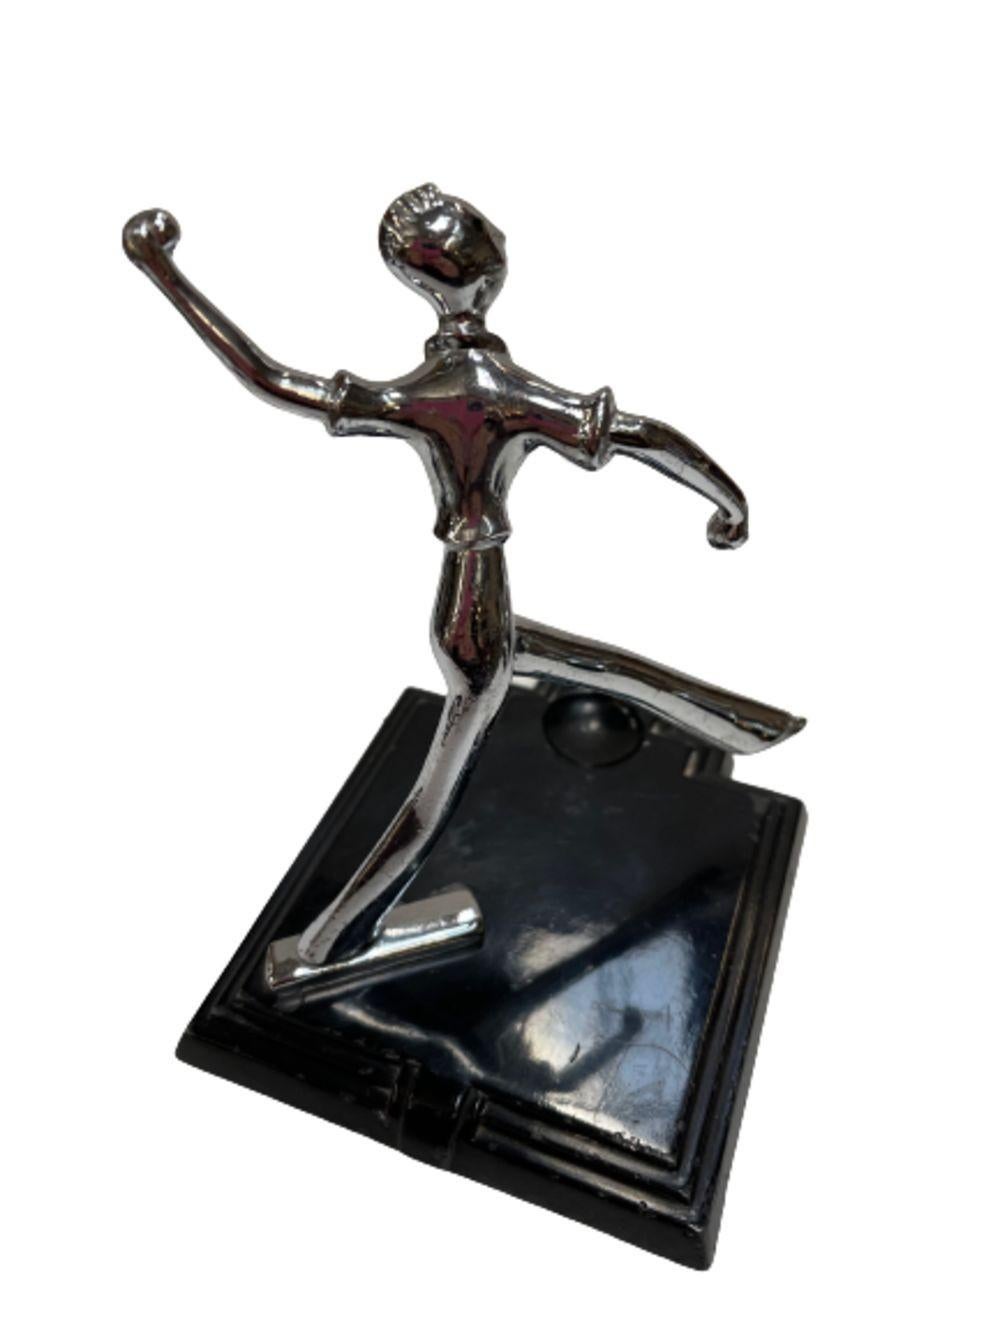 Decorative chrome Art Deco Round Ball lighter on a black enameled stepped base with a chromed figural sculpture of a ball player in mid-throw. This matching set was released by Ronson out of New Jersy in 1931.

Dimensions of lighter:
3